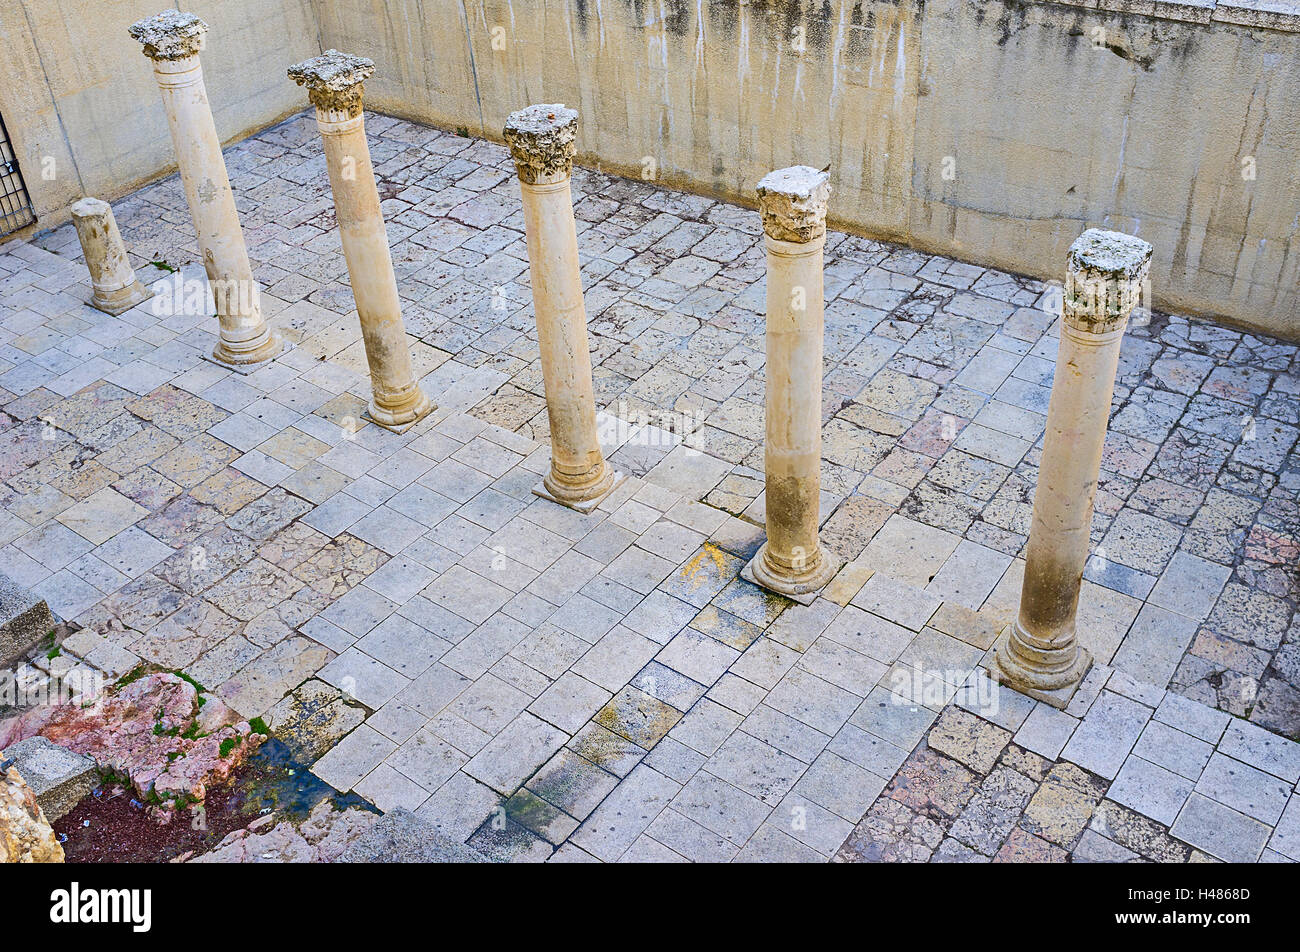 The ancient  Roman colonnade (Cardo) located in Jewish Quarter of Jerusalem, Israel. Stock Photo